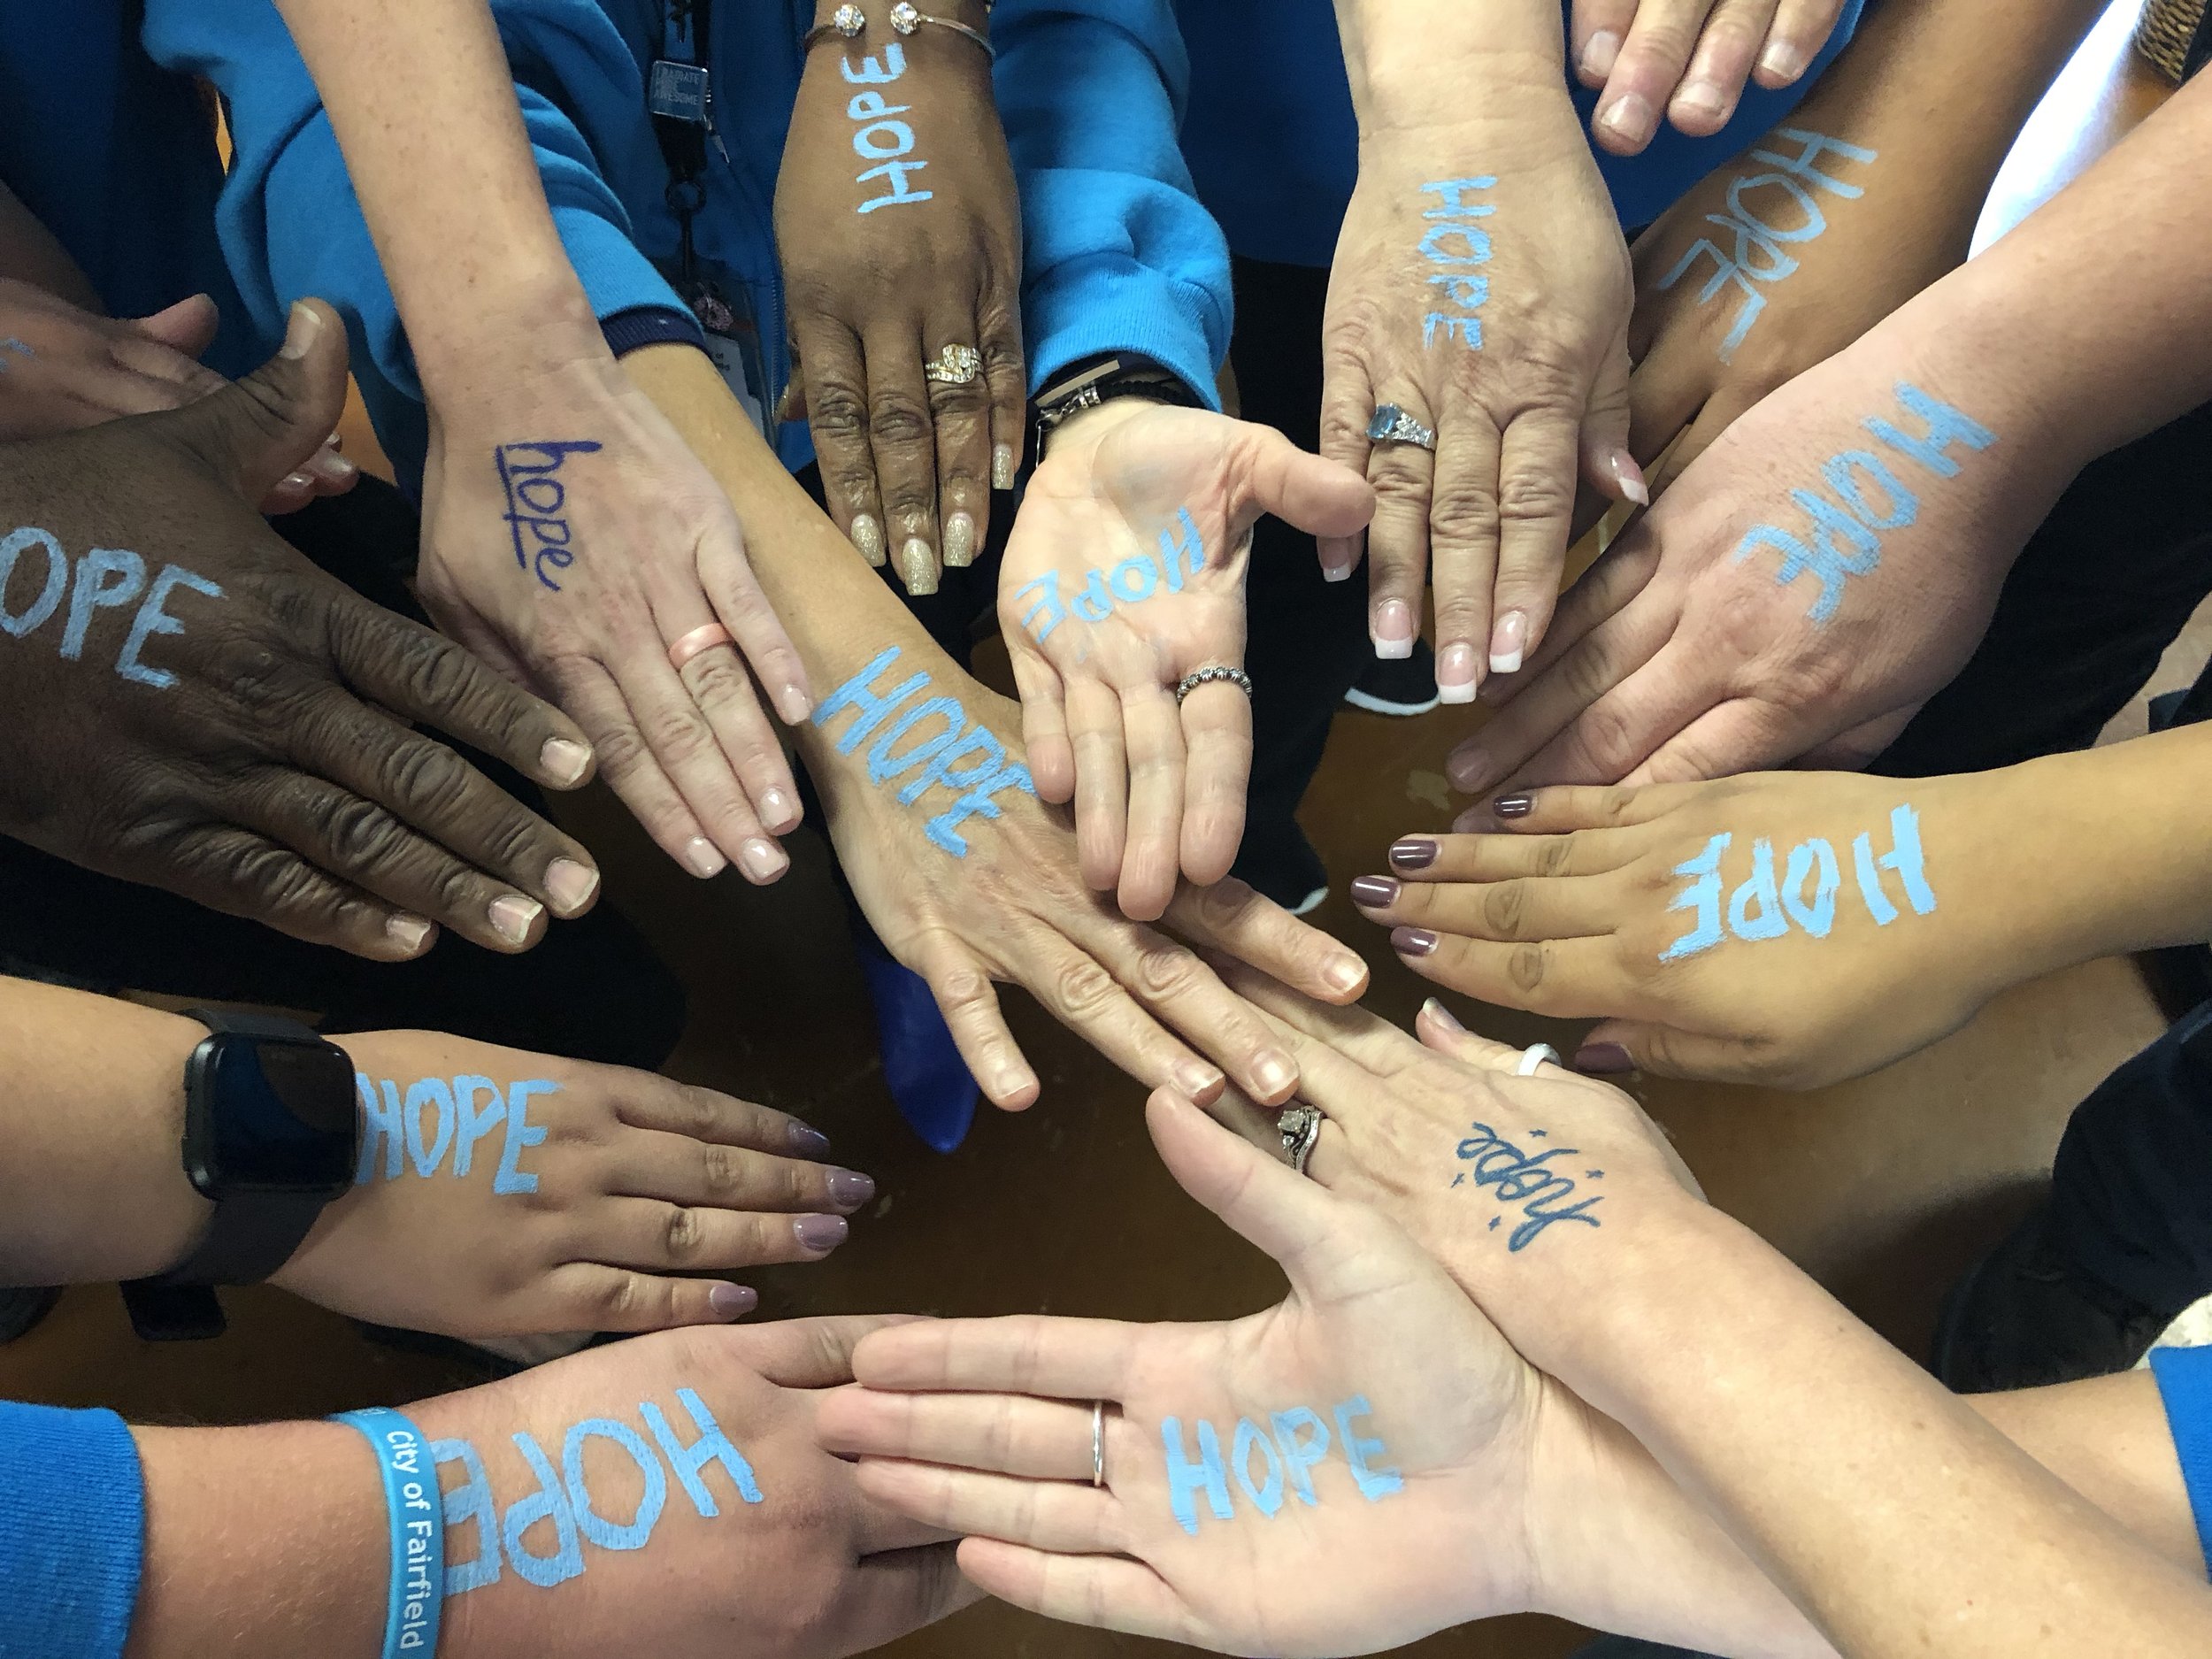 Multiple hands with 'hope' written on each hand in preparation for a cheer